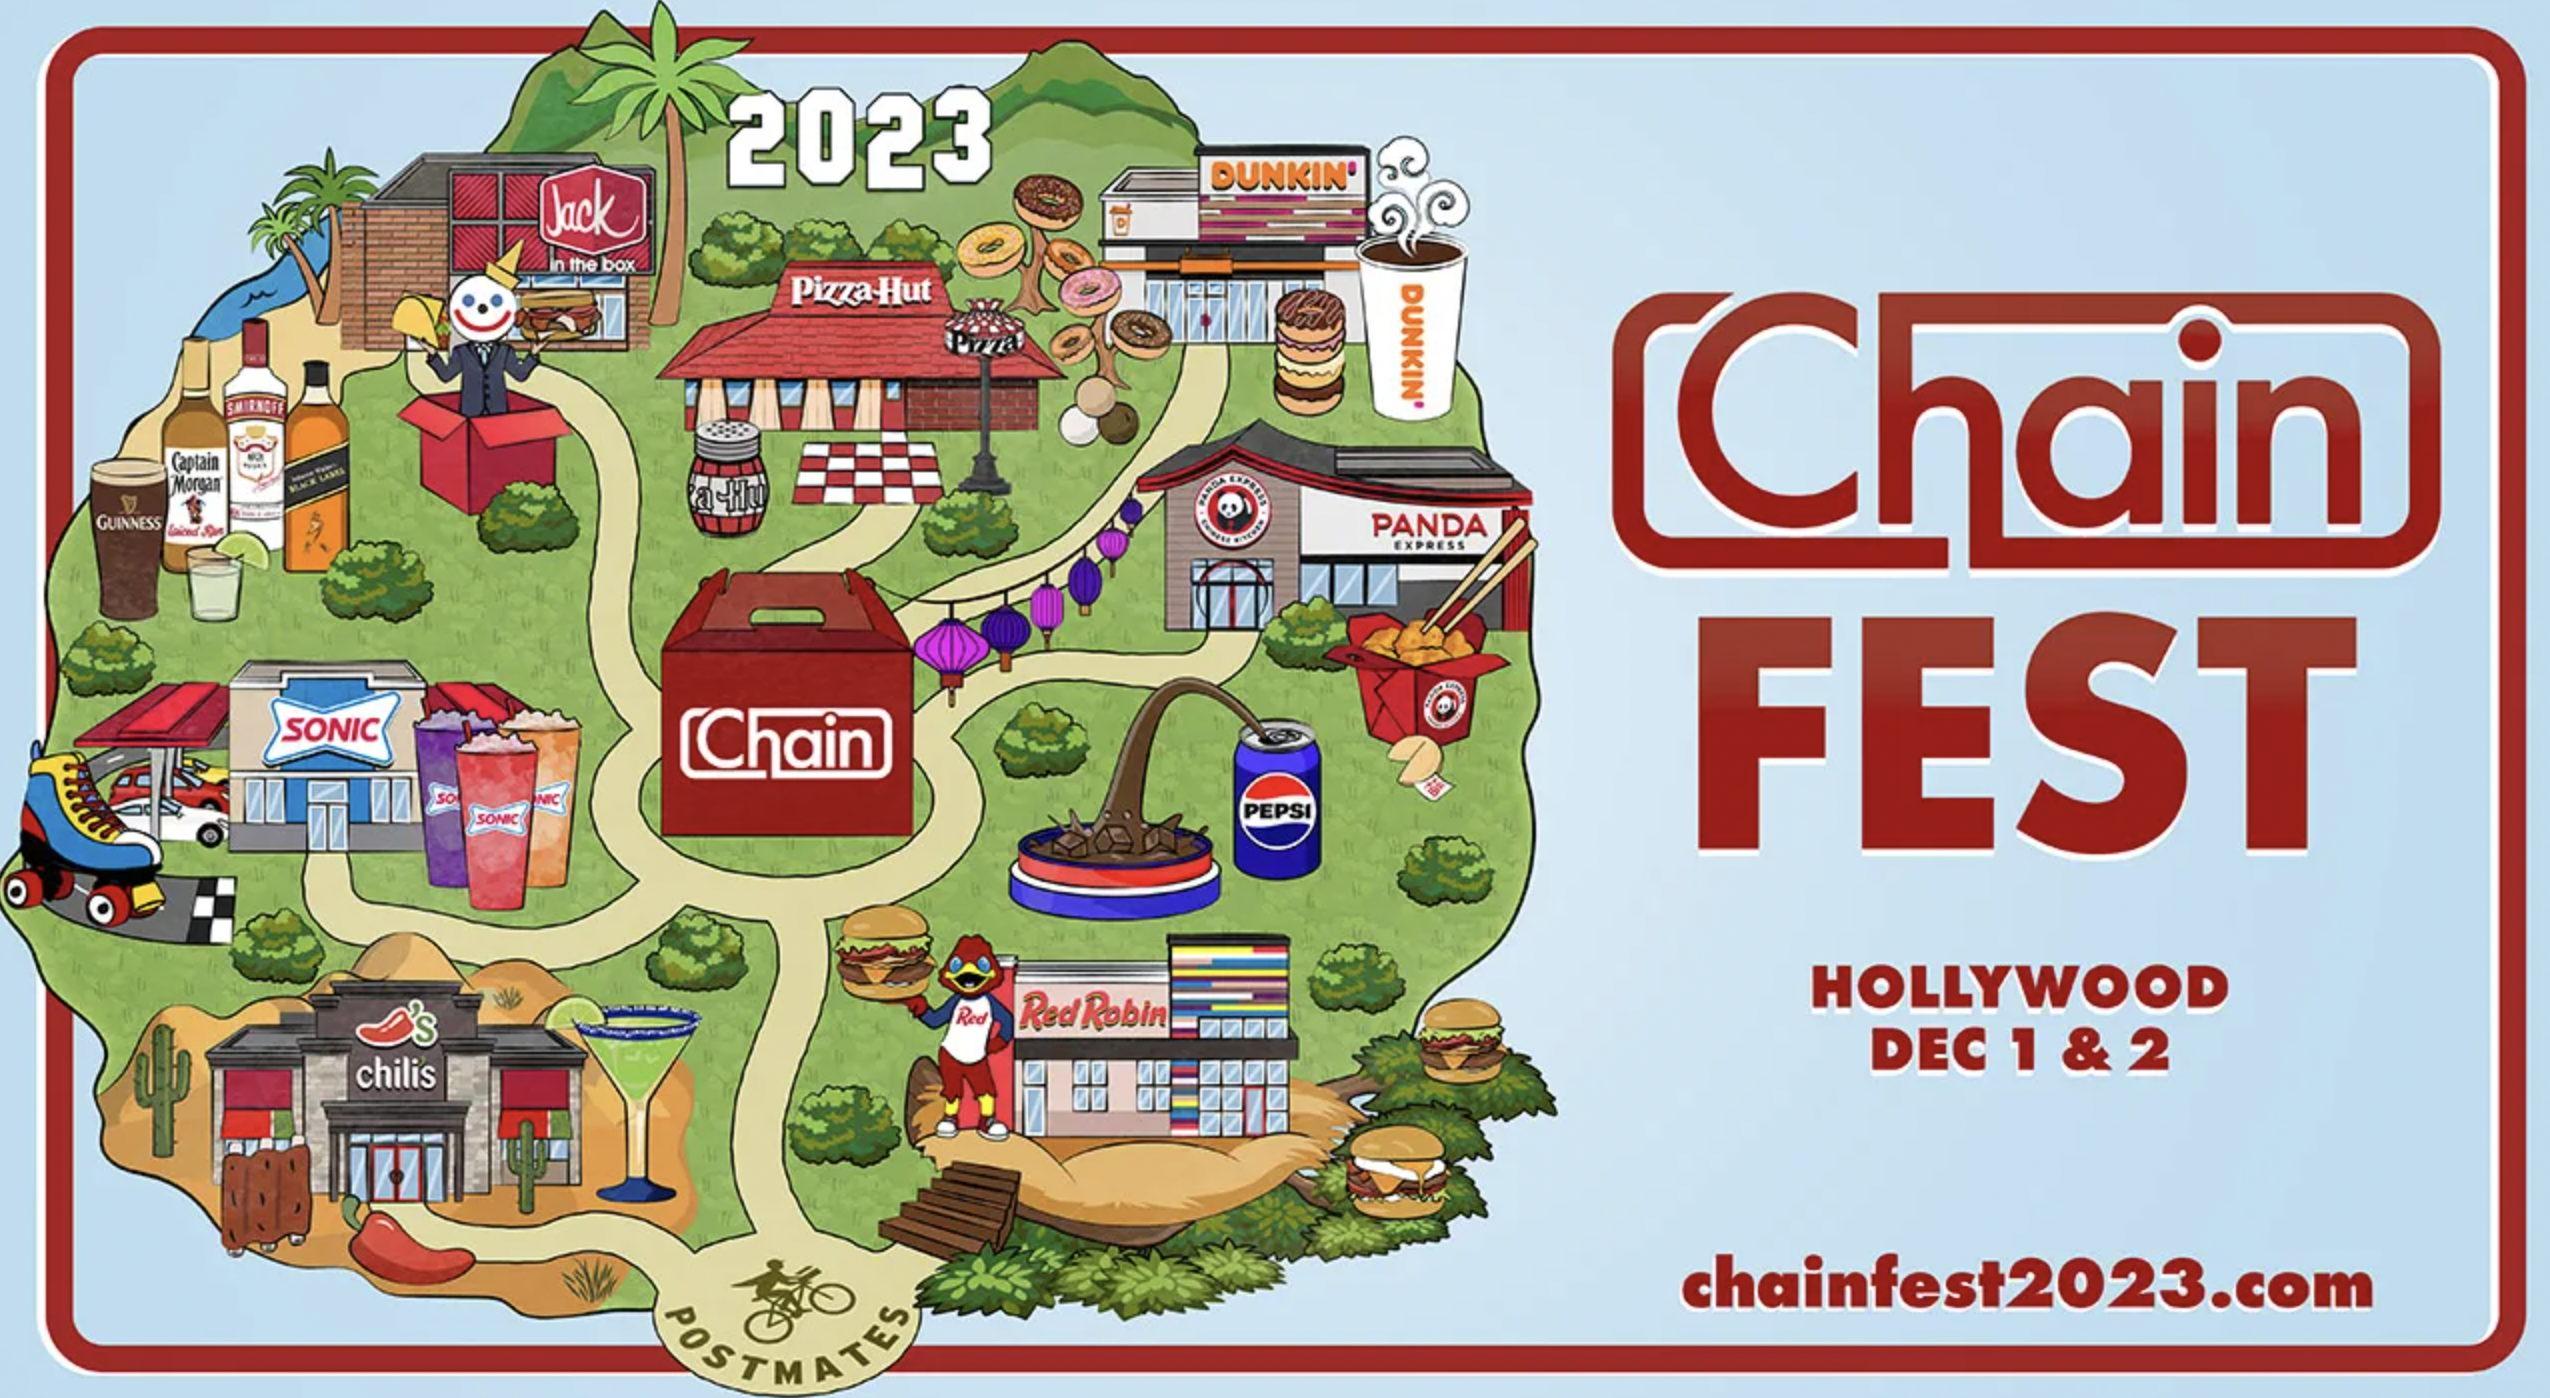 ChainFEST: A Revolutionary Culinary Extravaganza Celebrating Chain Food